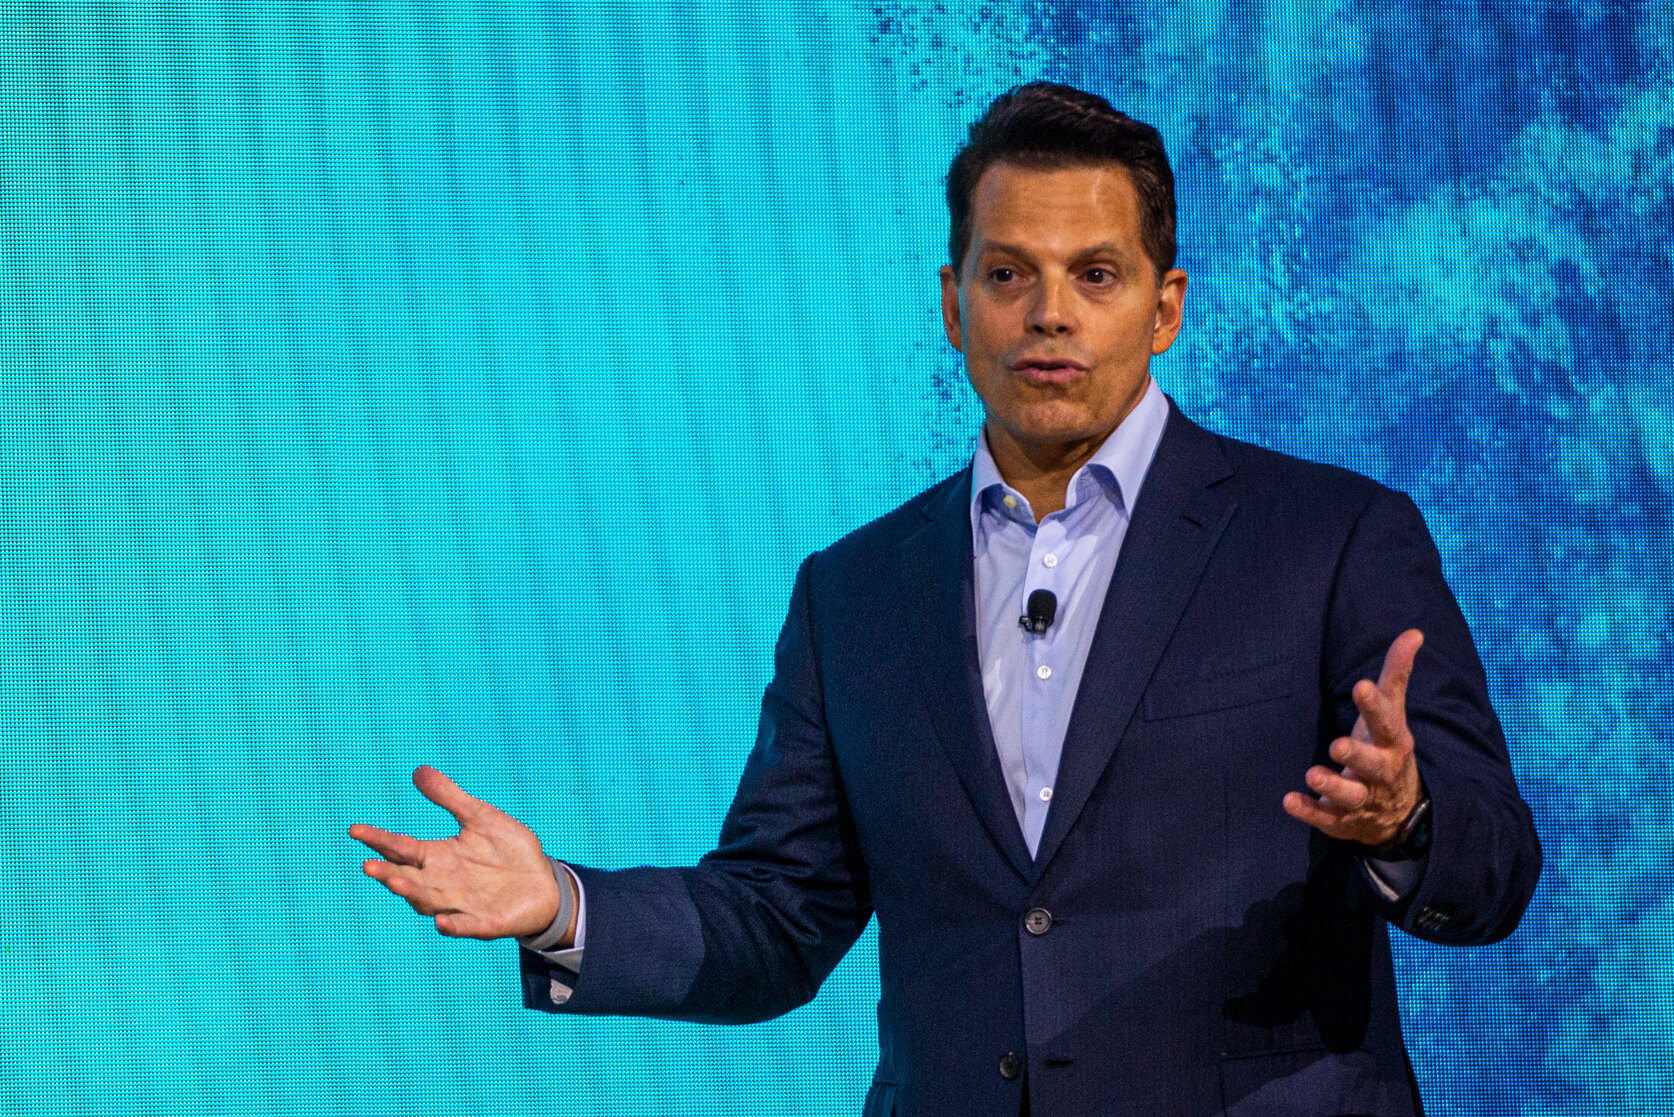 Here’s Why Scaramucci Expects Bitcoin Price To Reach 0,000 Before 2030